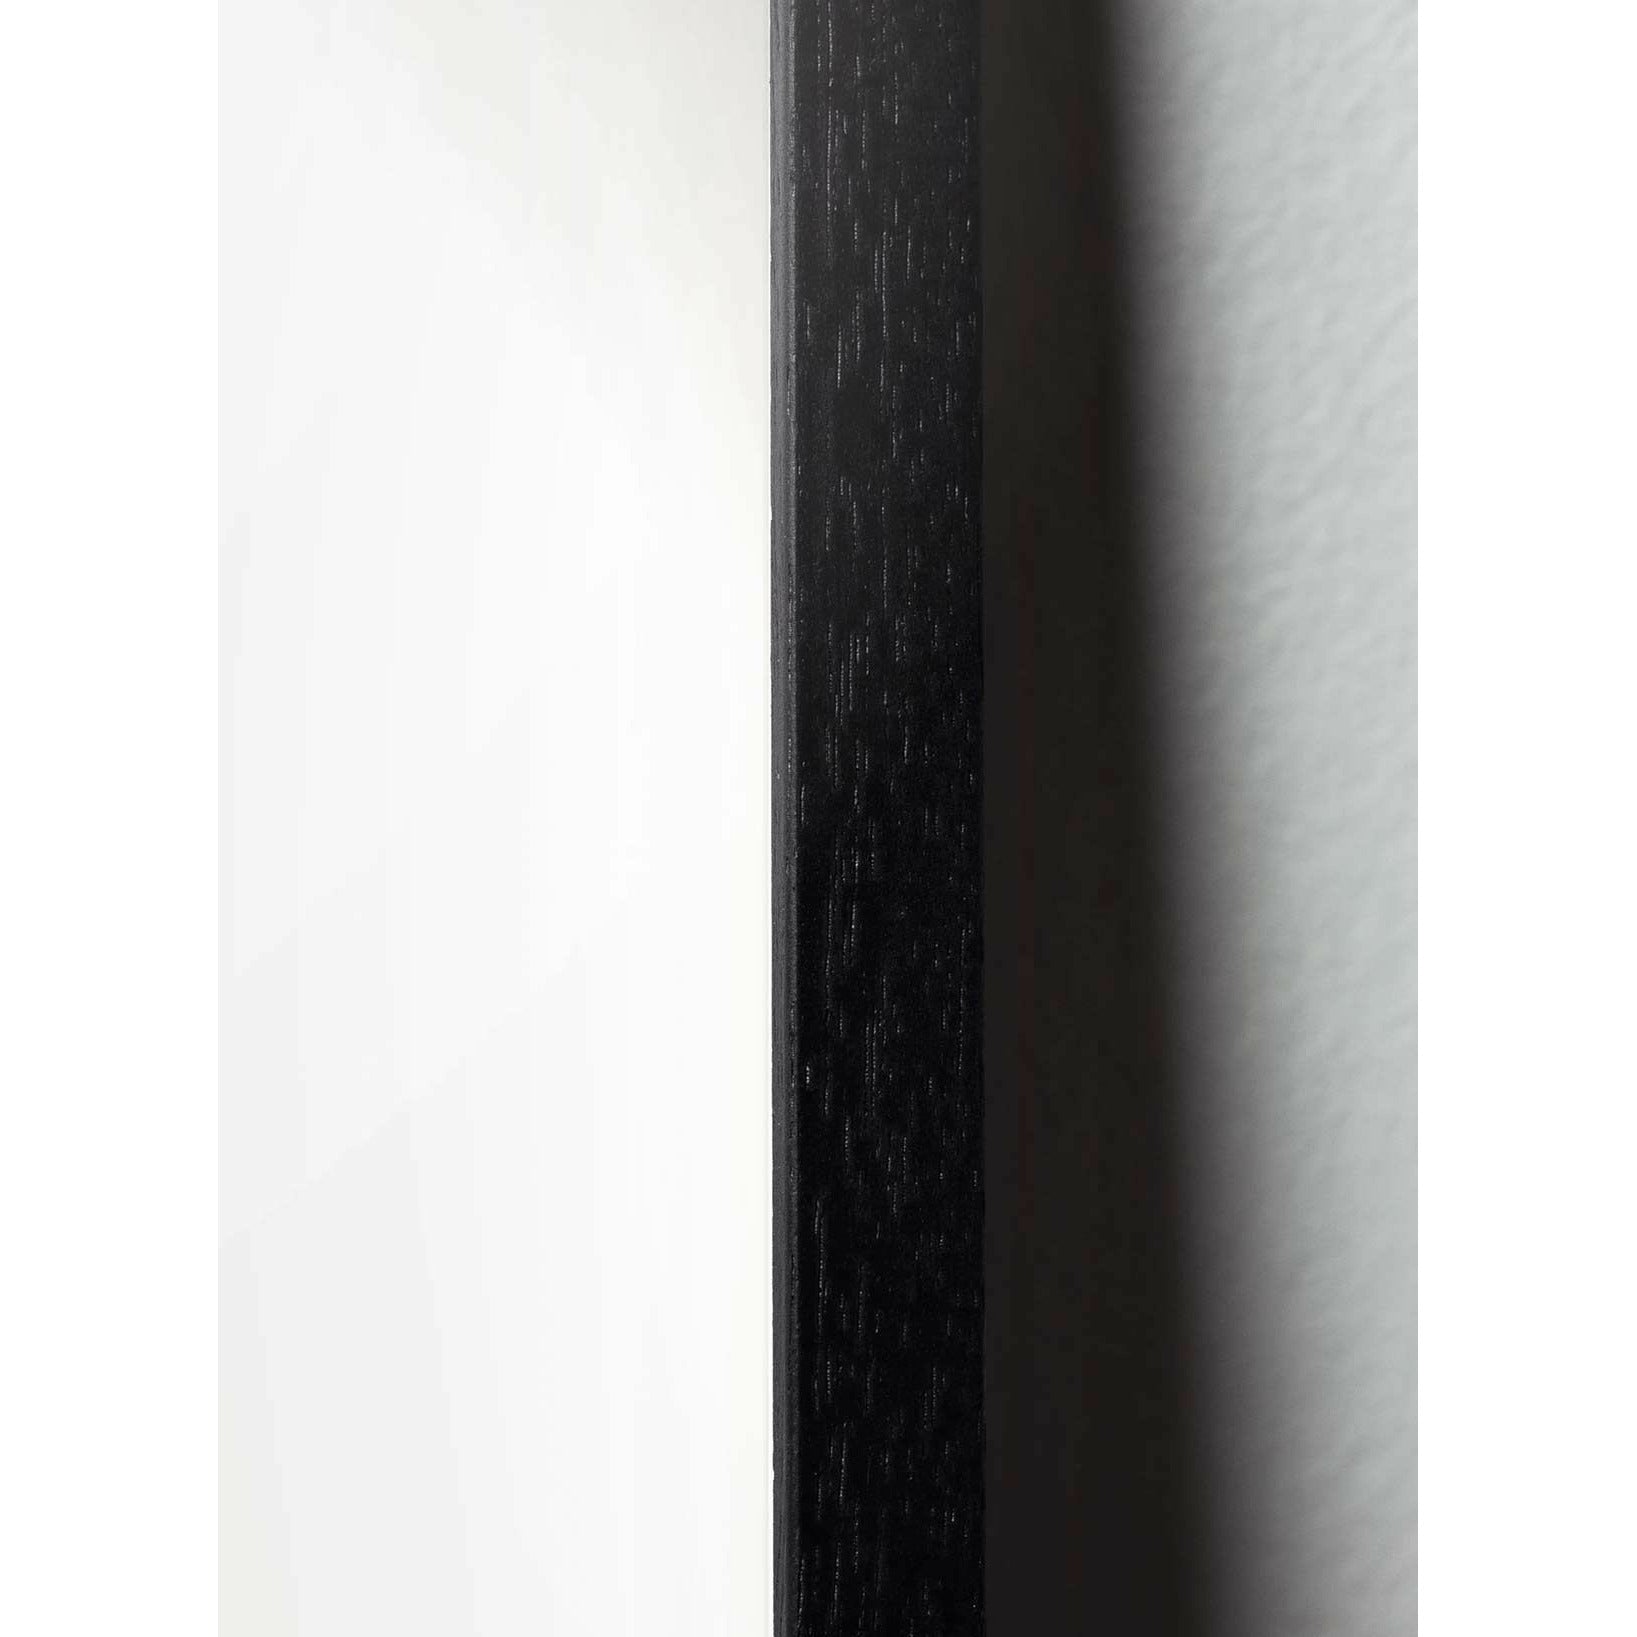 Brainchild Swan Parade Poster, Frame Made Of Black Lacquered Wood, 70x100 Cm